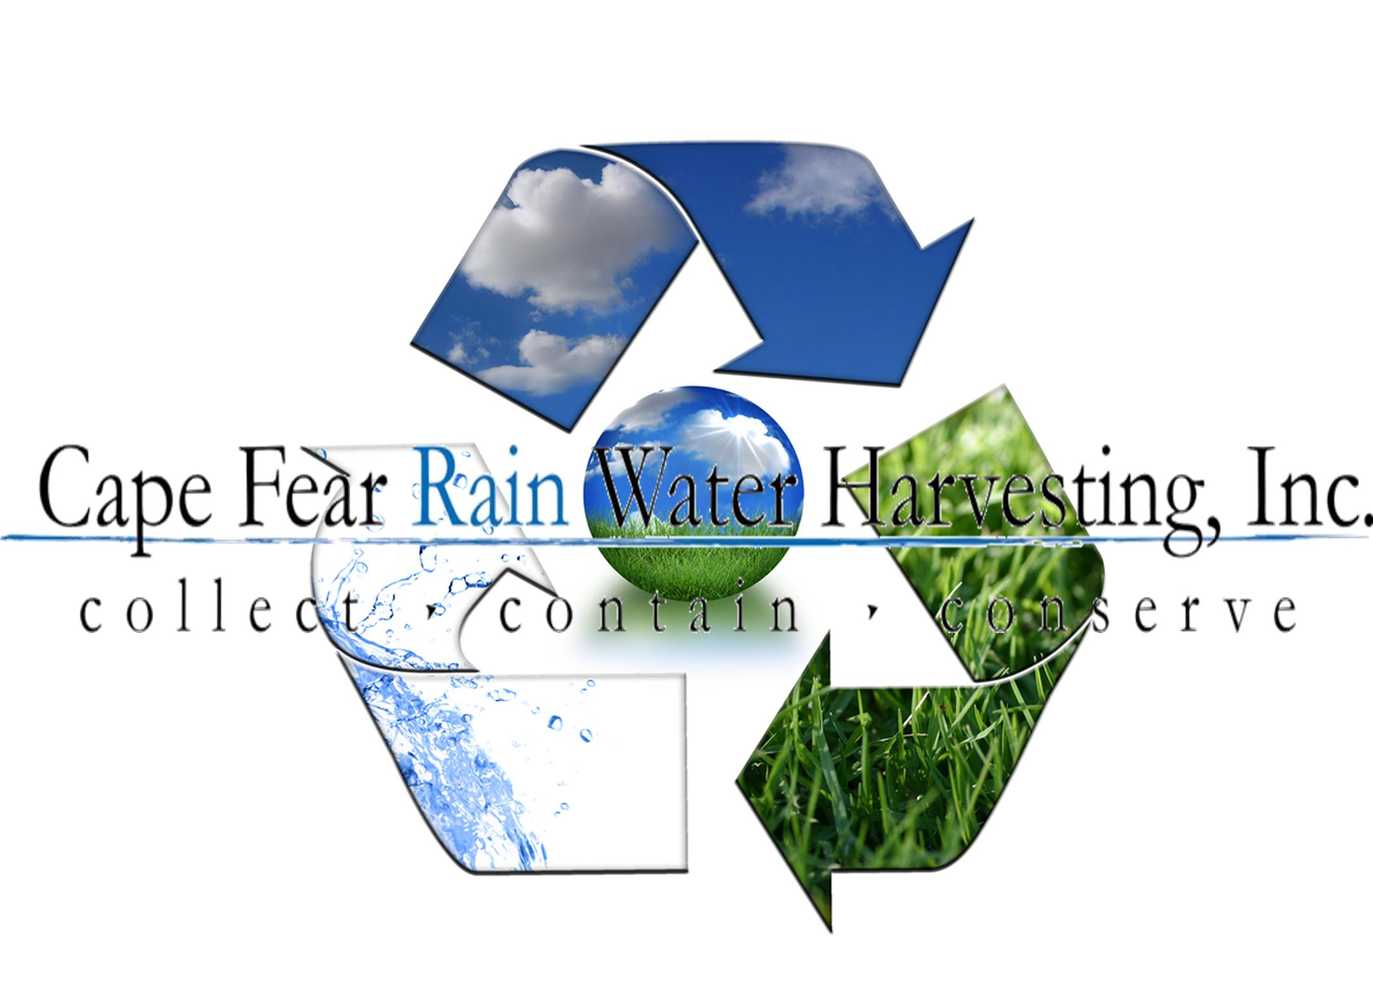 Project photos from Cape Fear Rain Water Harvesting, Inc.